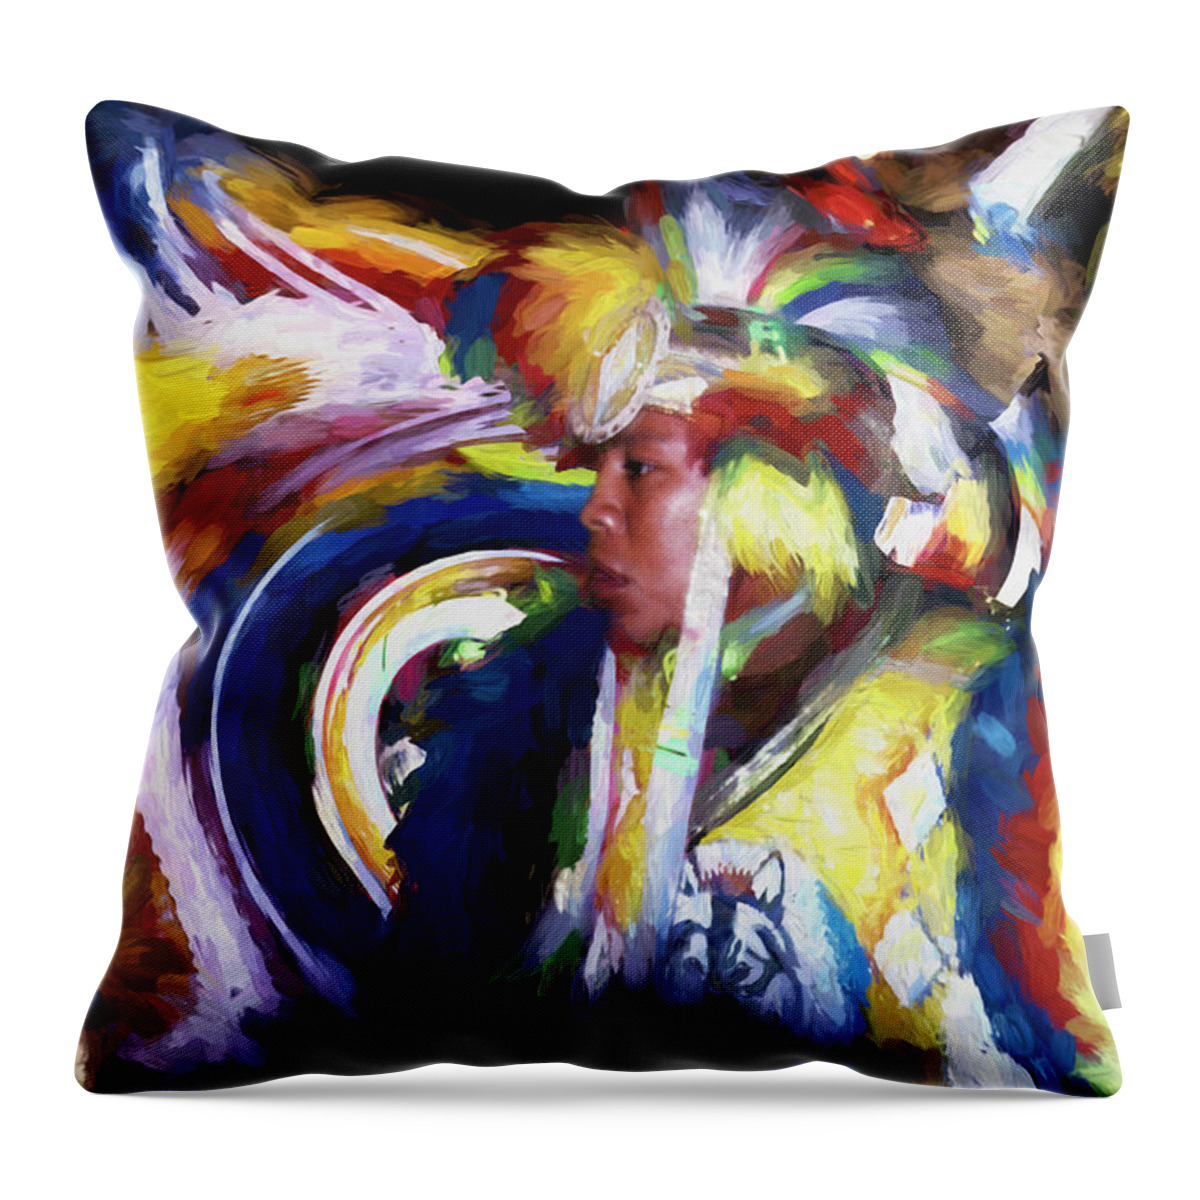  Indian Throw Pillow featuring the photograph Native Dance by Wayne King